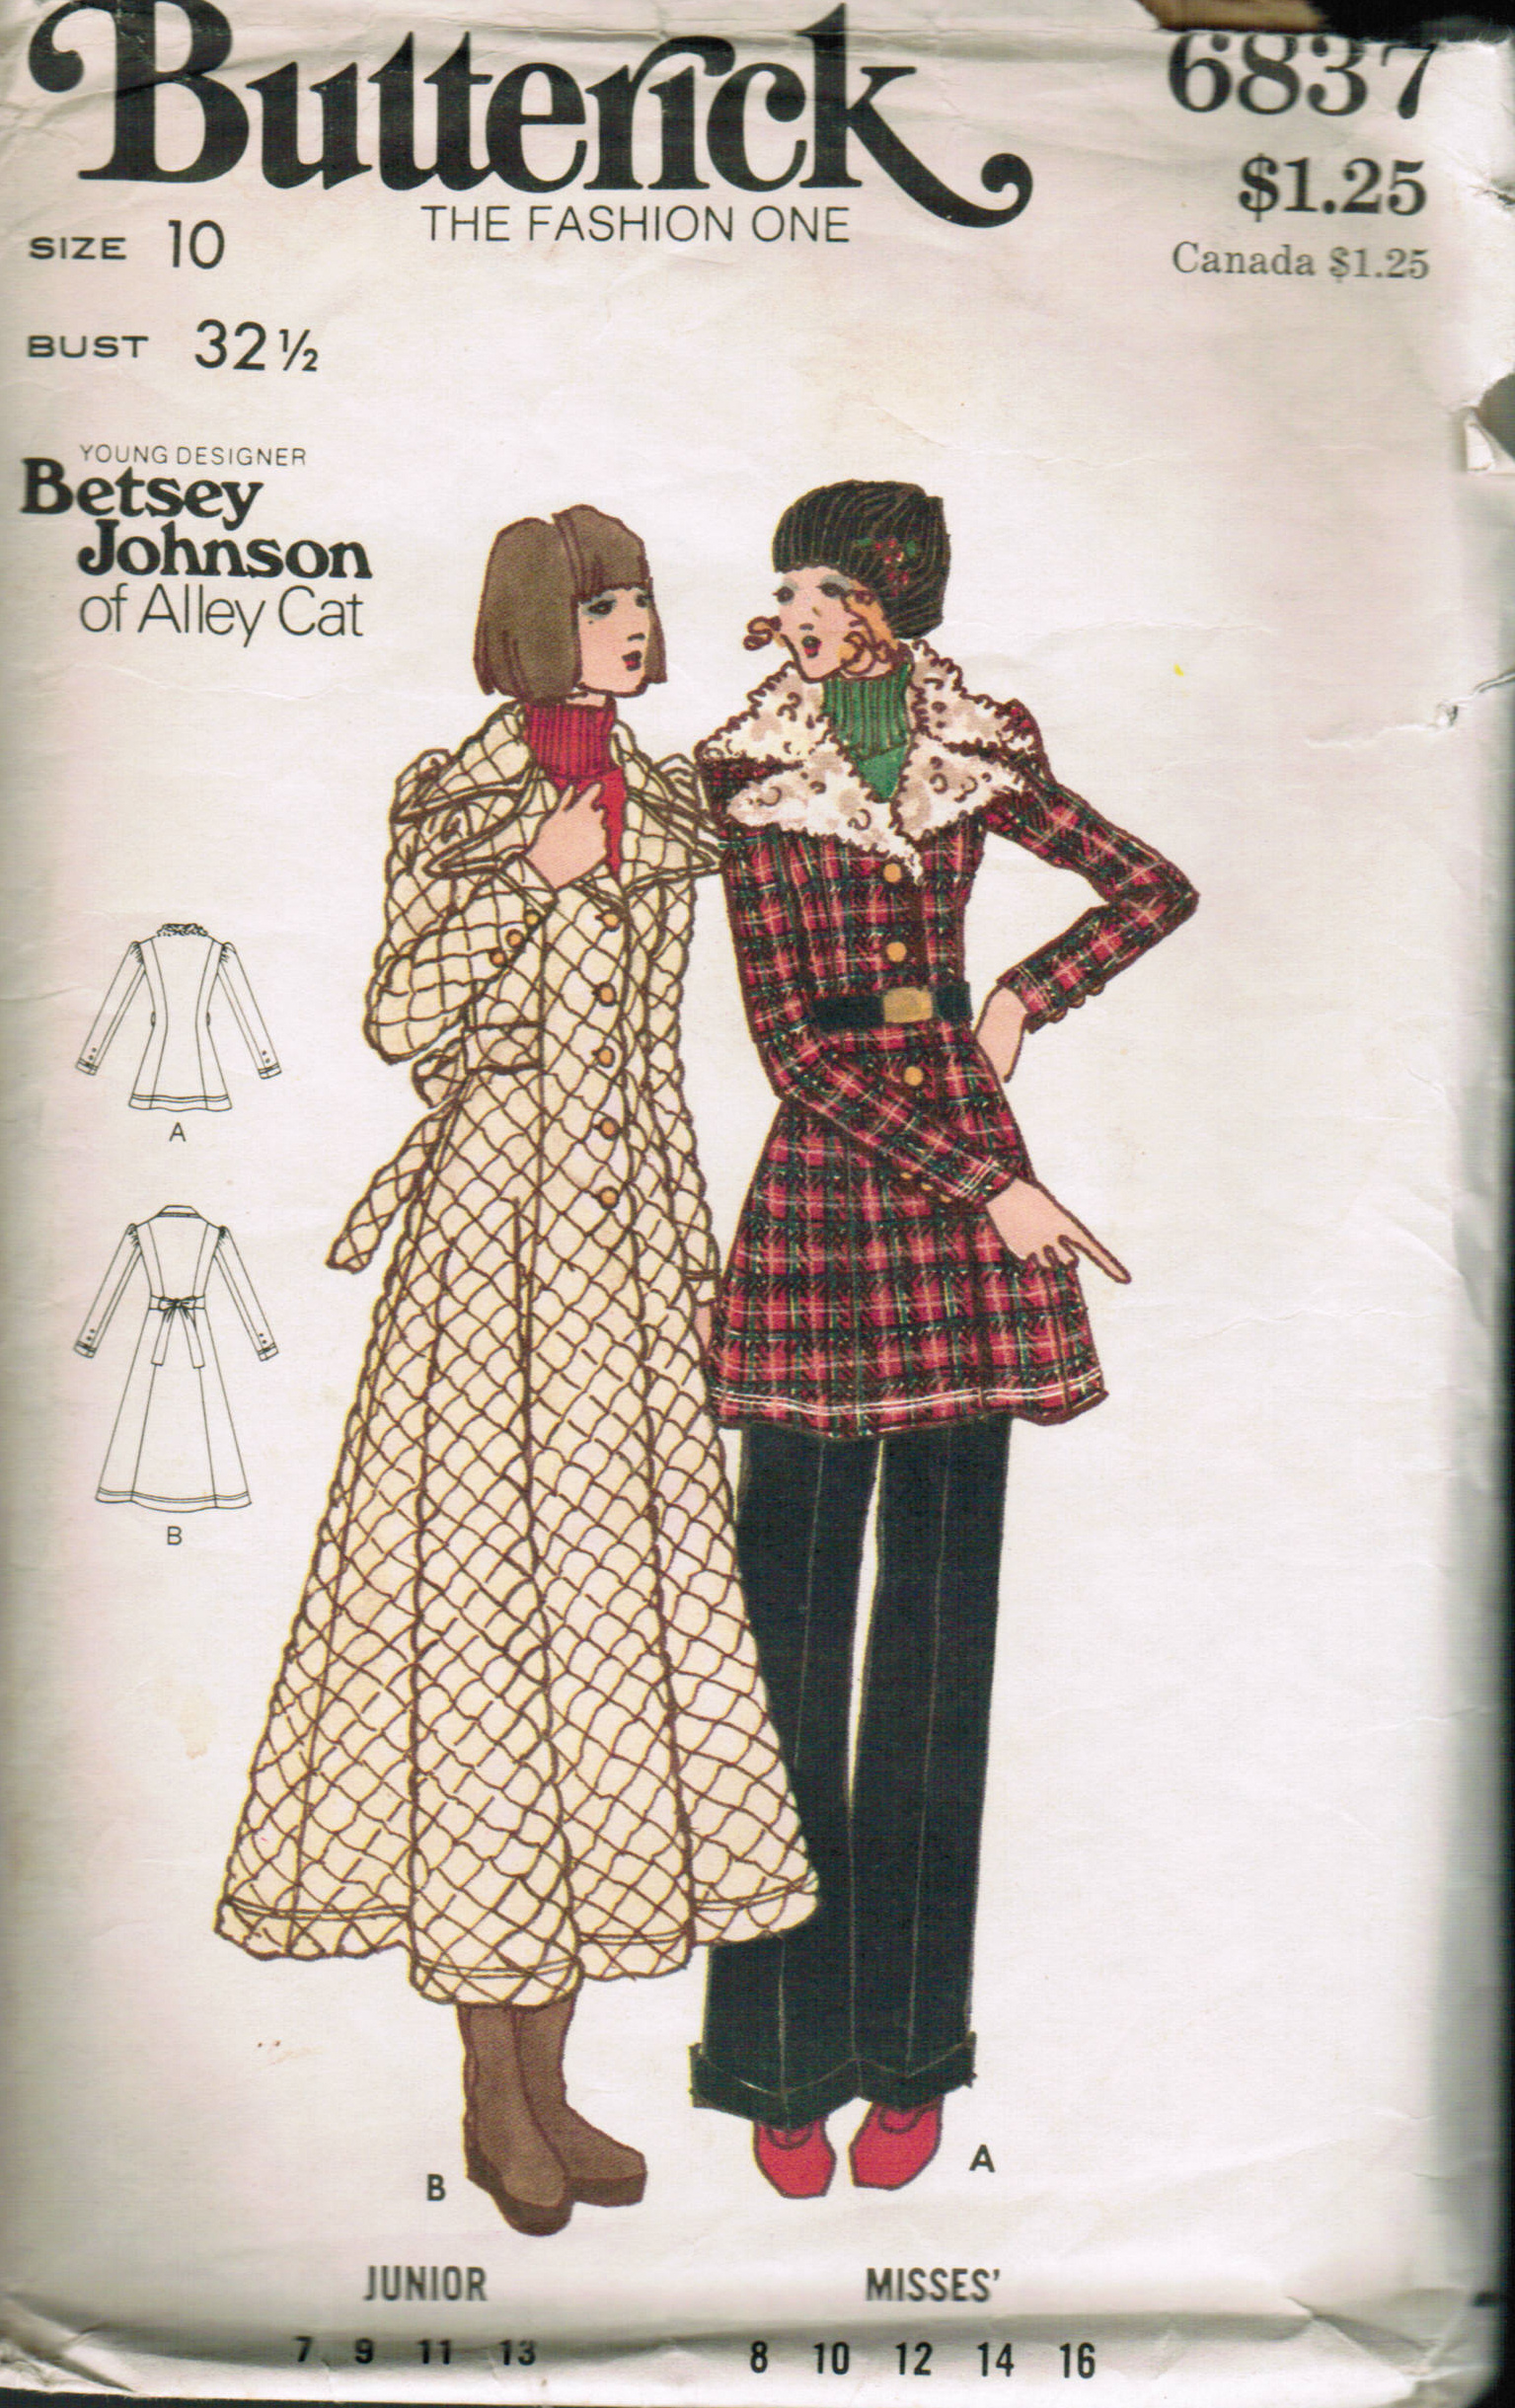 Butterick 6837 | Vintage Sewing Patterns | FANDOM powered by Wikia